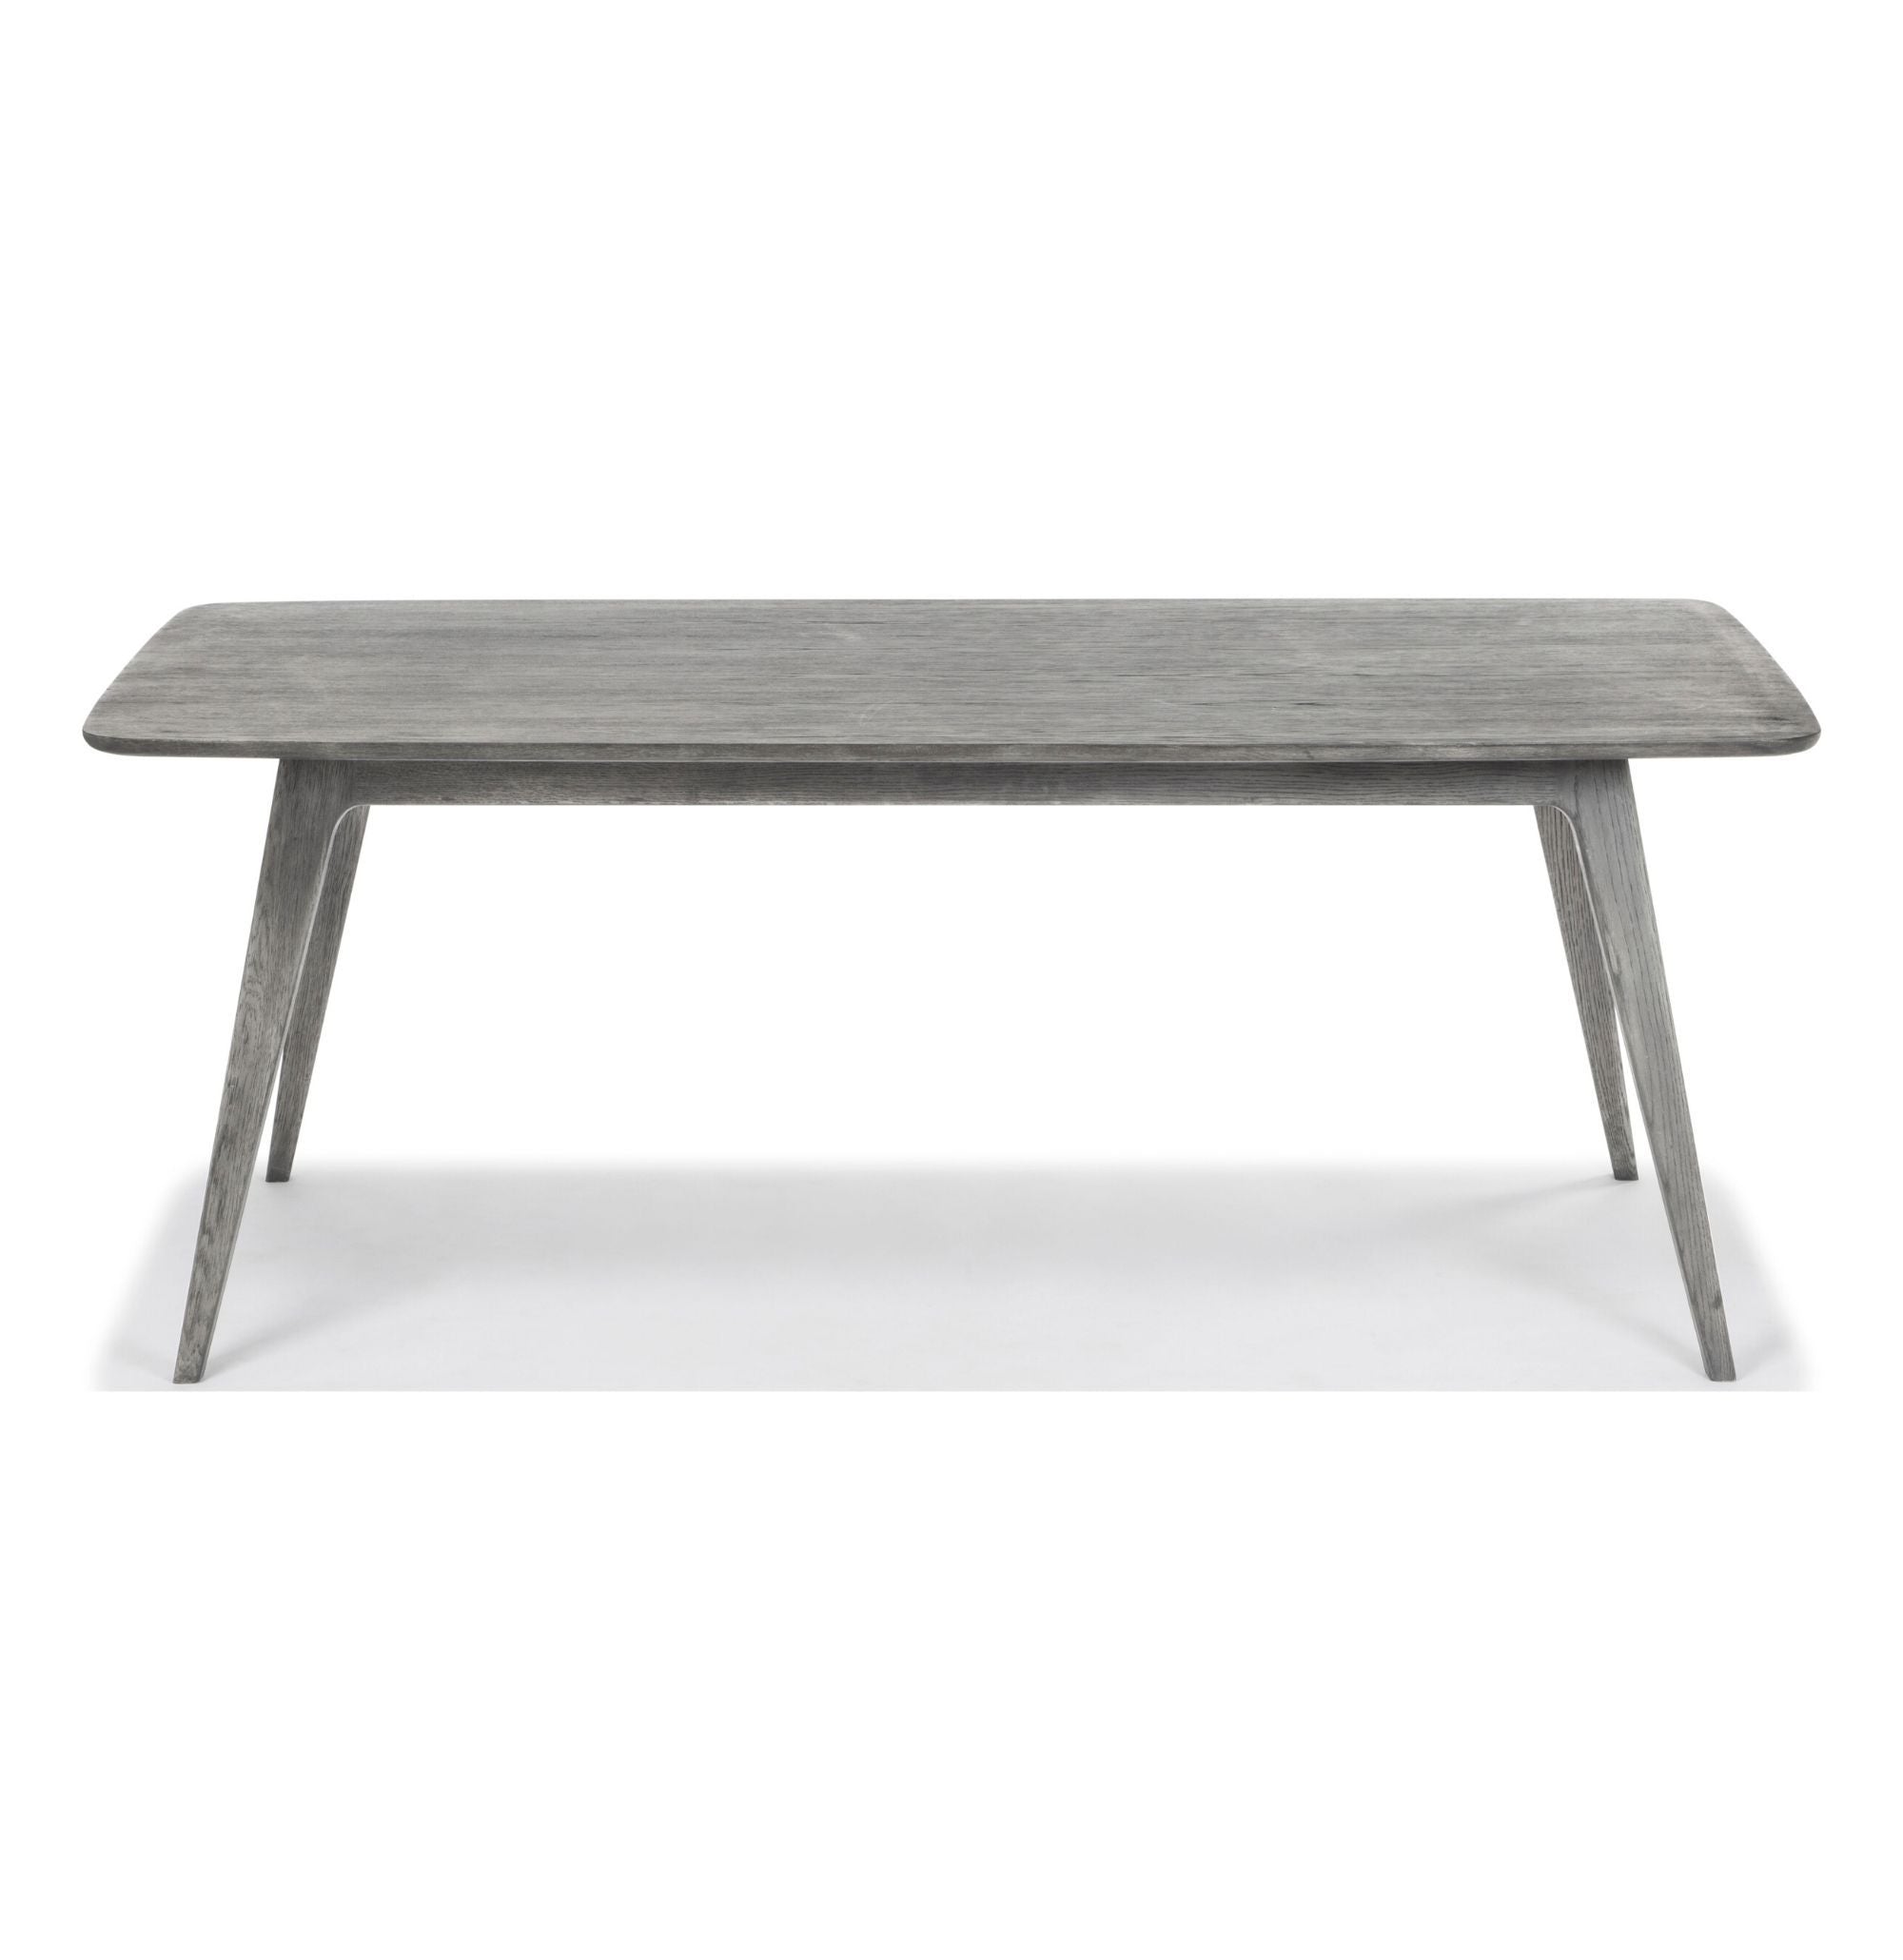 Large Dining Table | Isla Grey - agos - co